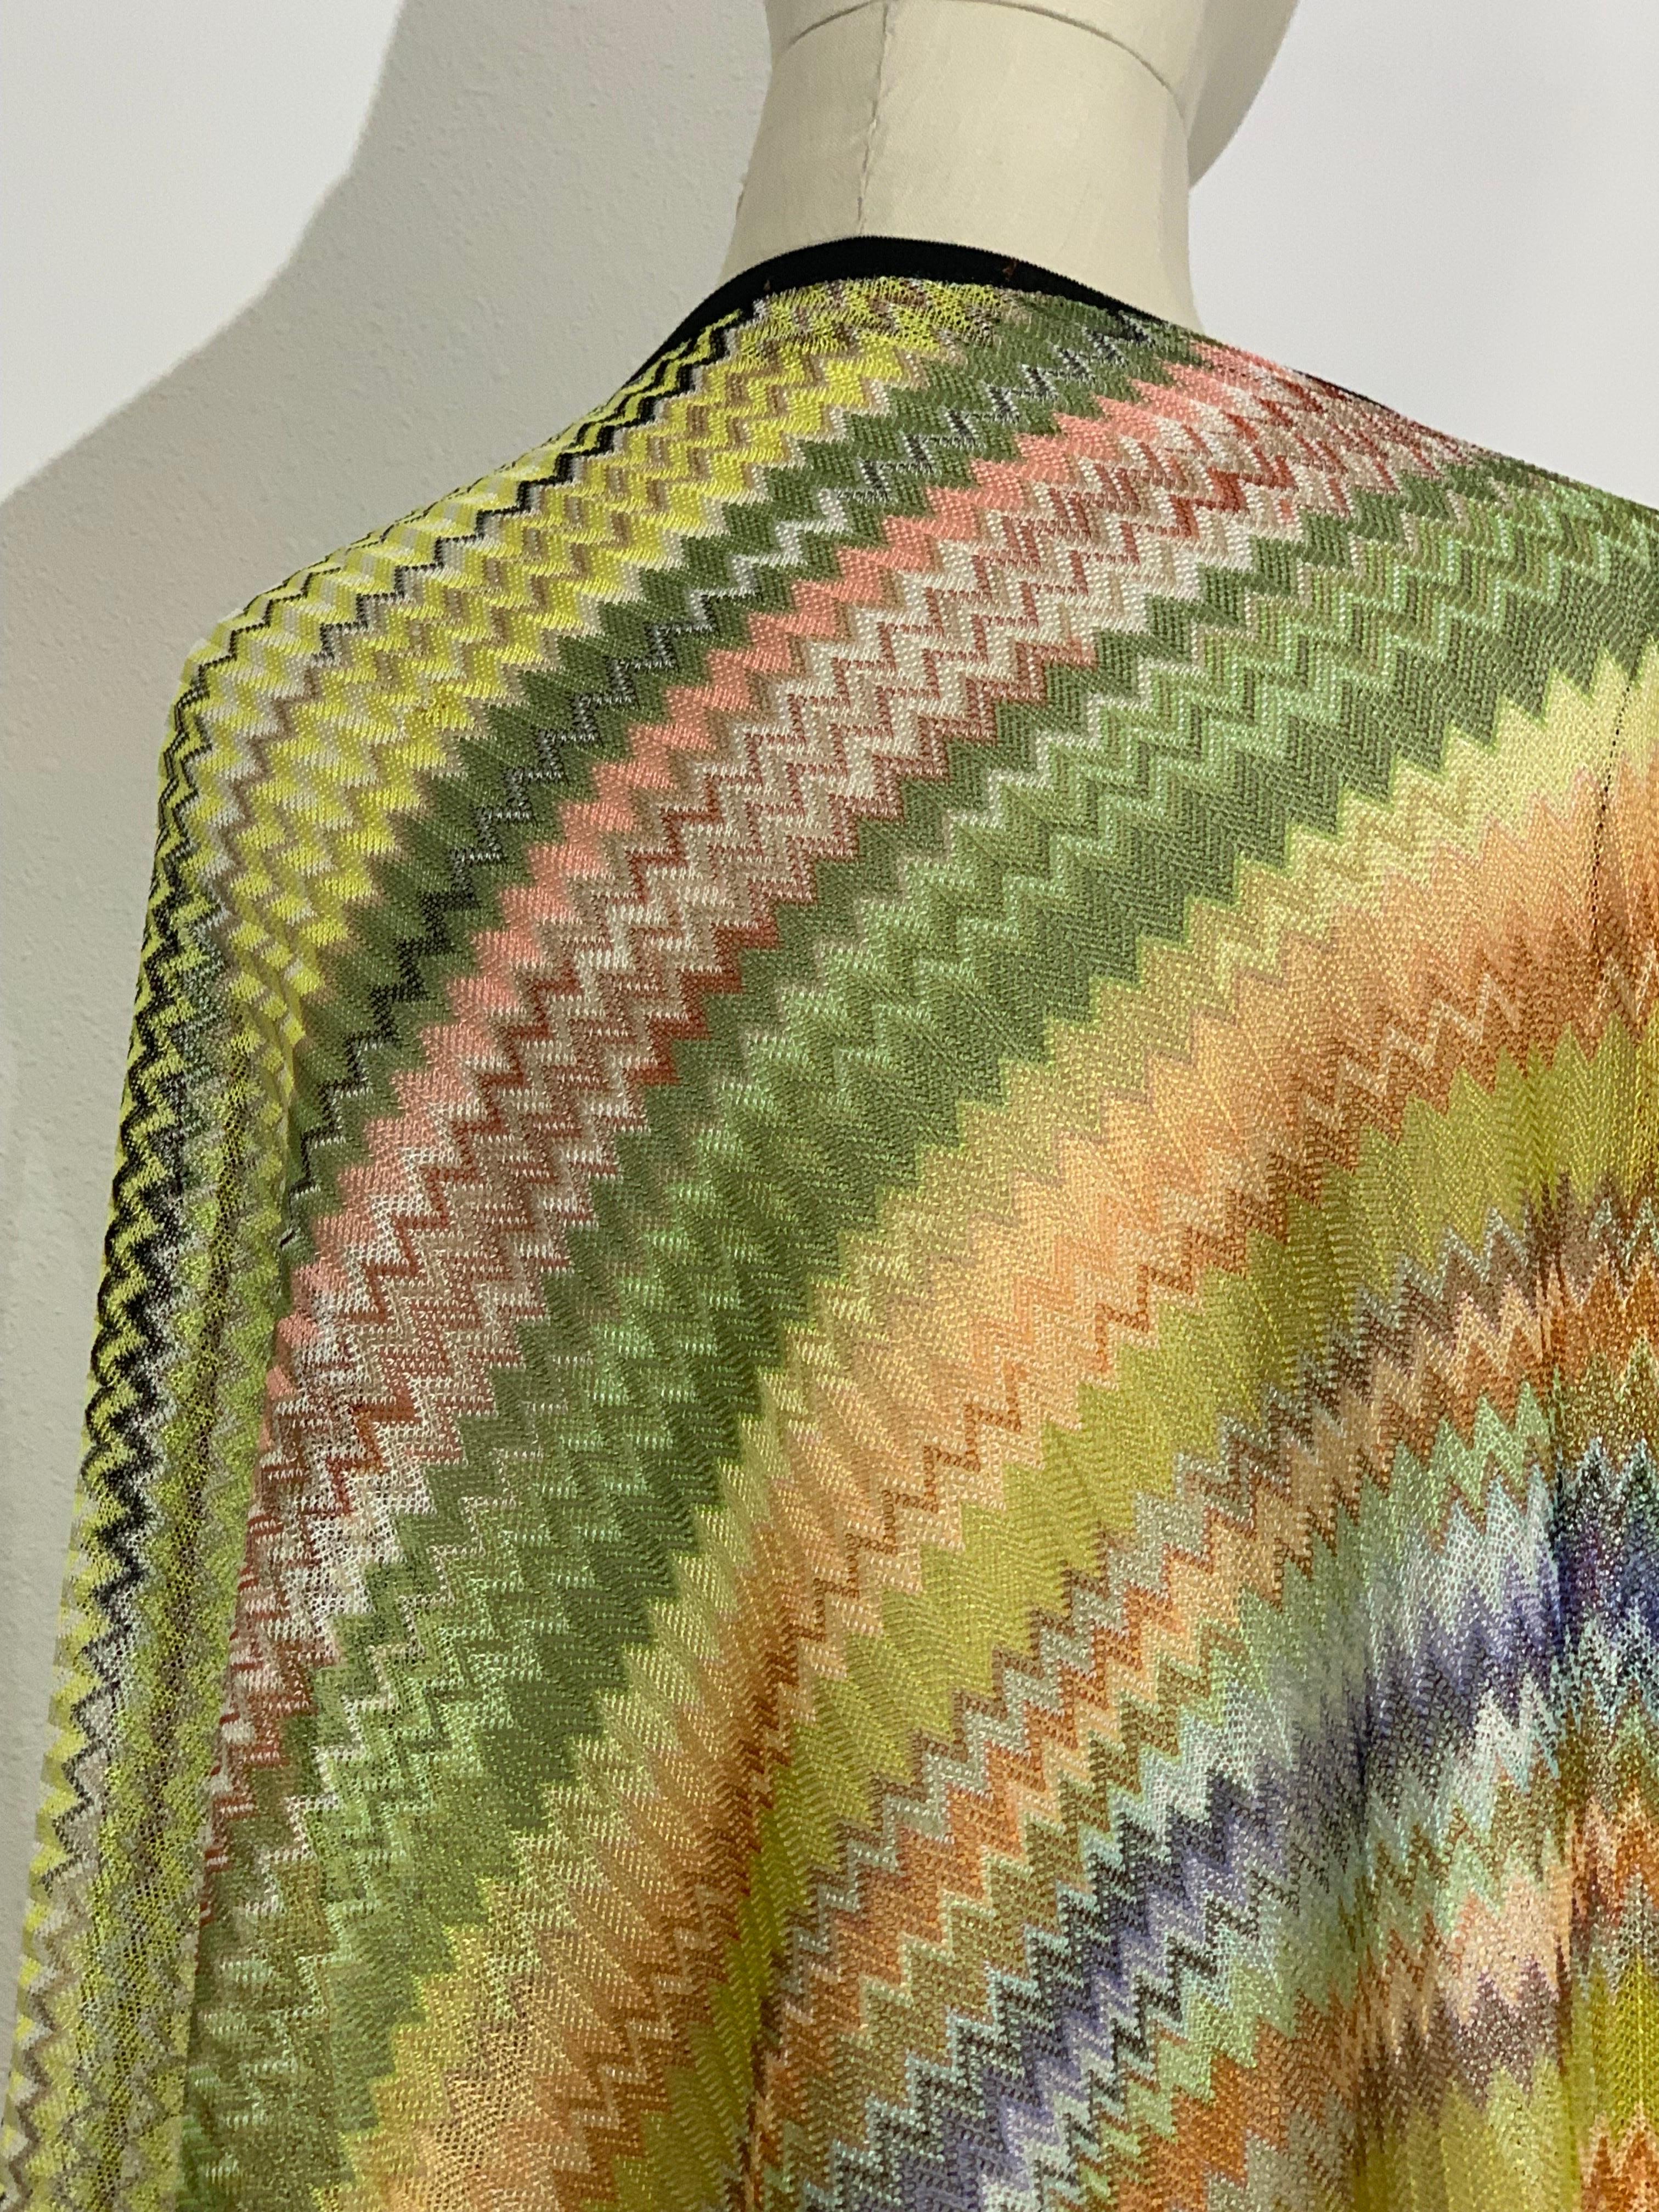 Missoni Spring/Summer Rayon & Cotton Knit Cover-Up in Classic Missoni Zig-Zag For Sale 6